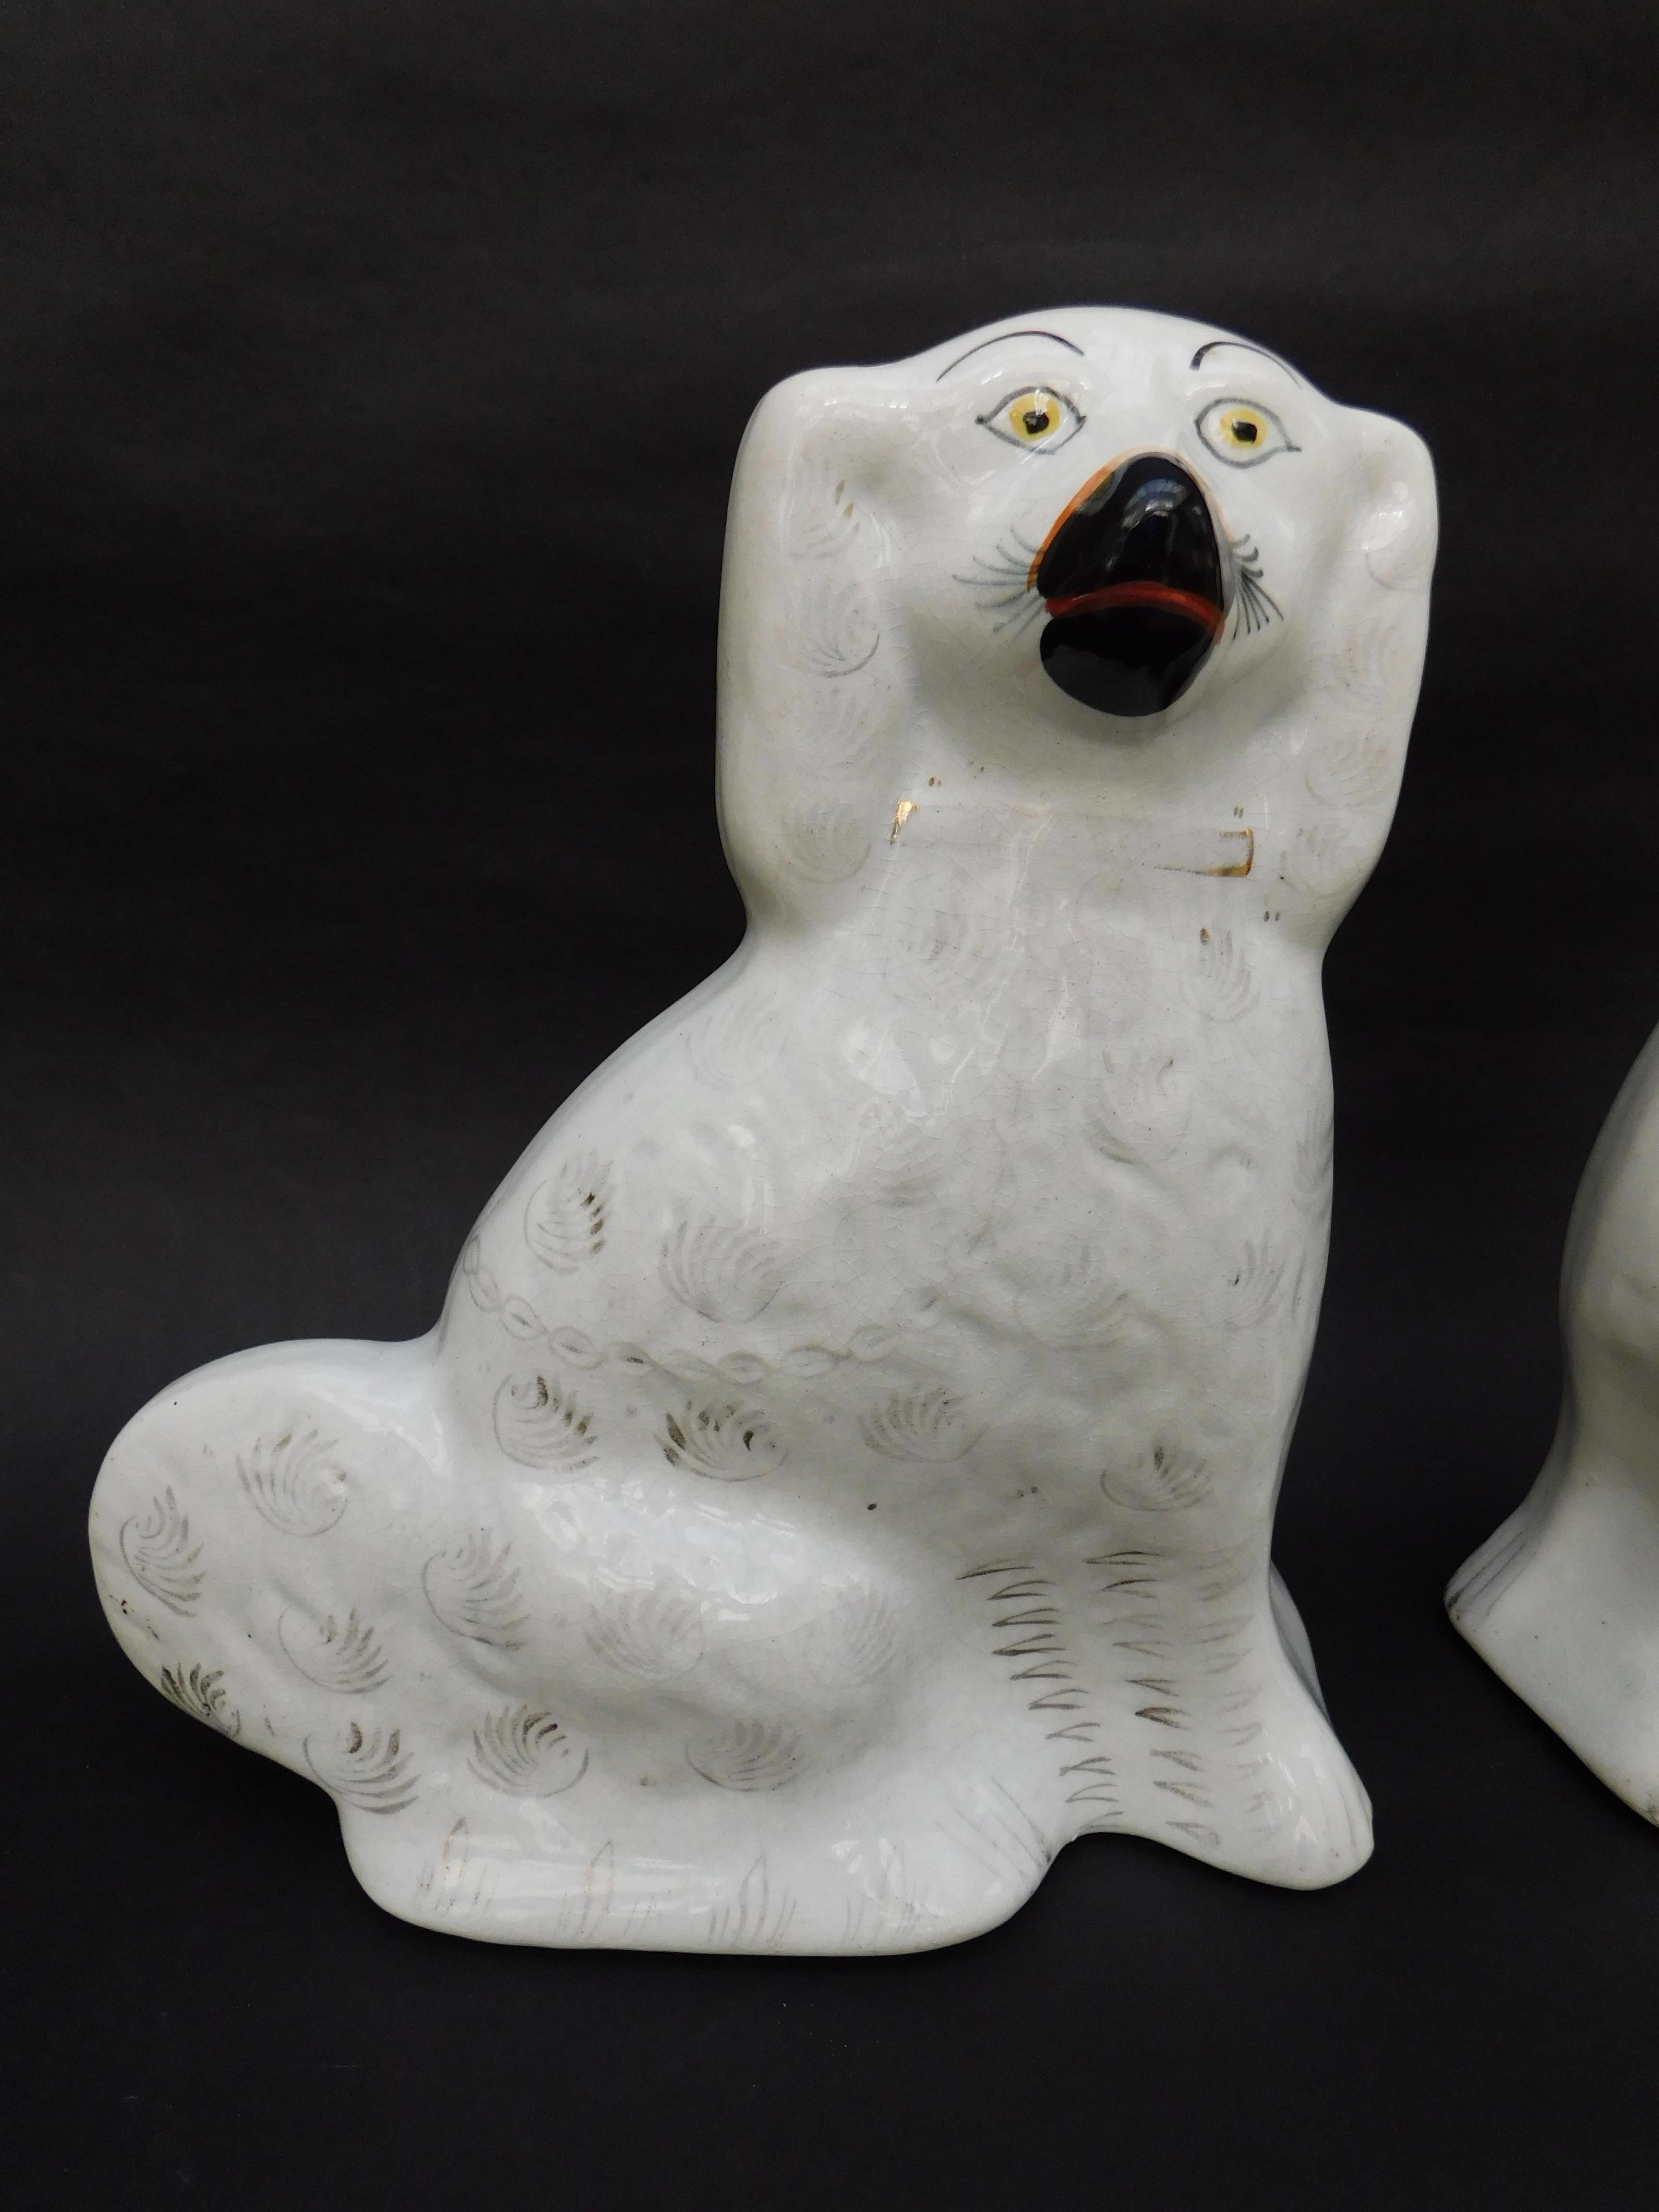 A lovely antique pair of white English Staffordshire porcelain spaniel dogs, circa 1860. This original mirror image pair is in good antique condition (worn gilding). One dog has chips to the feet as shown on the fifth photograph. They would make